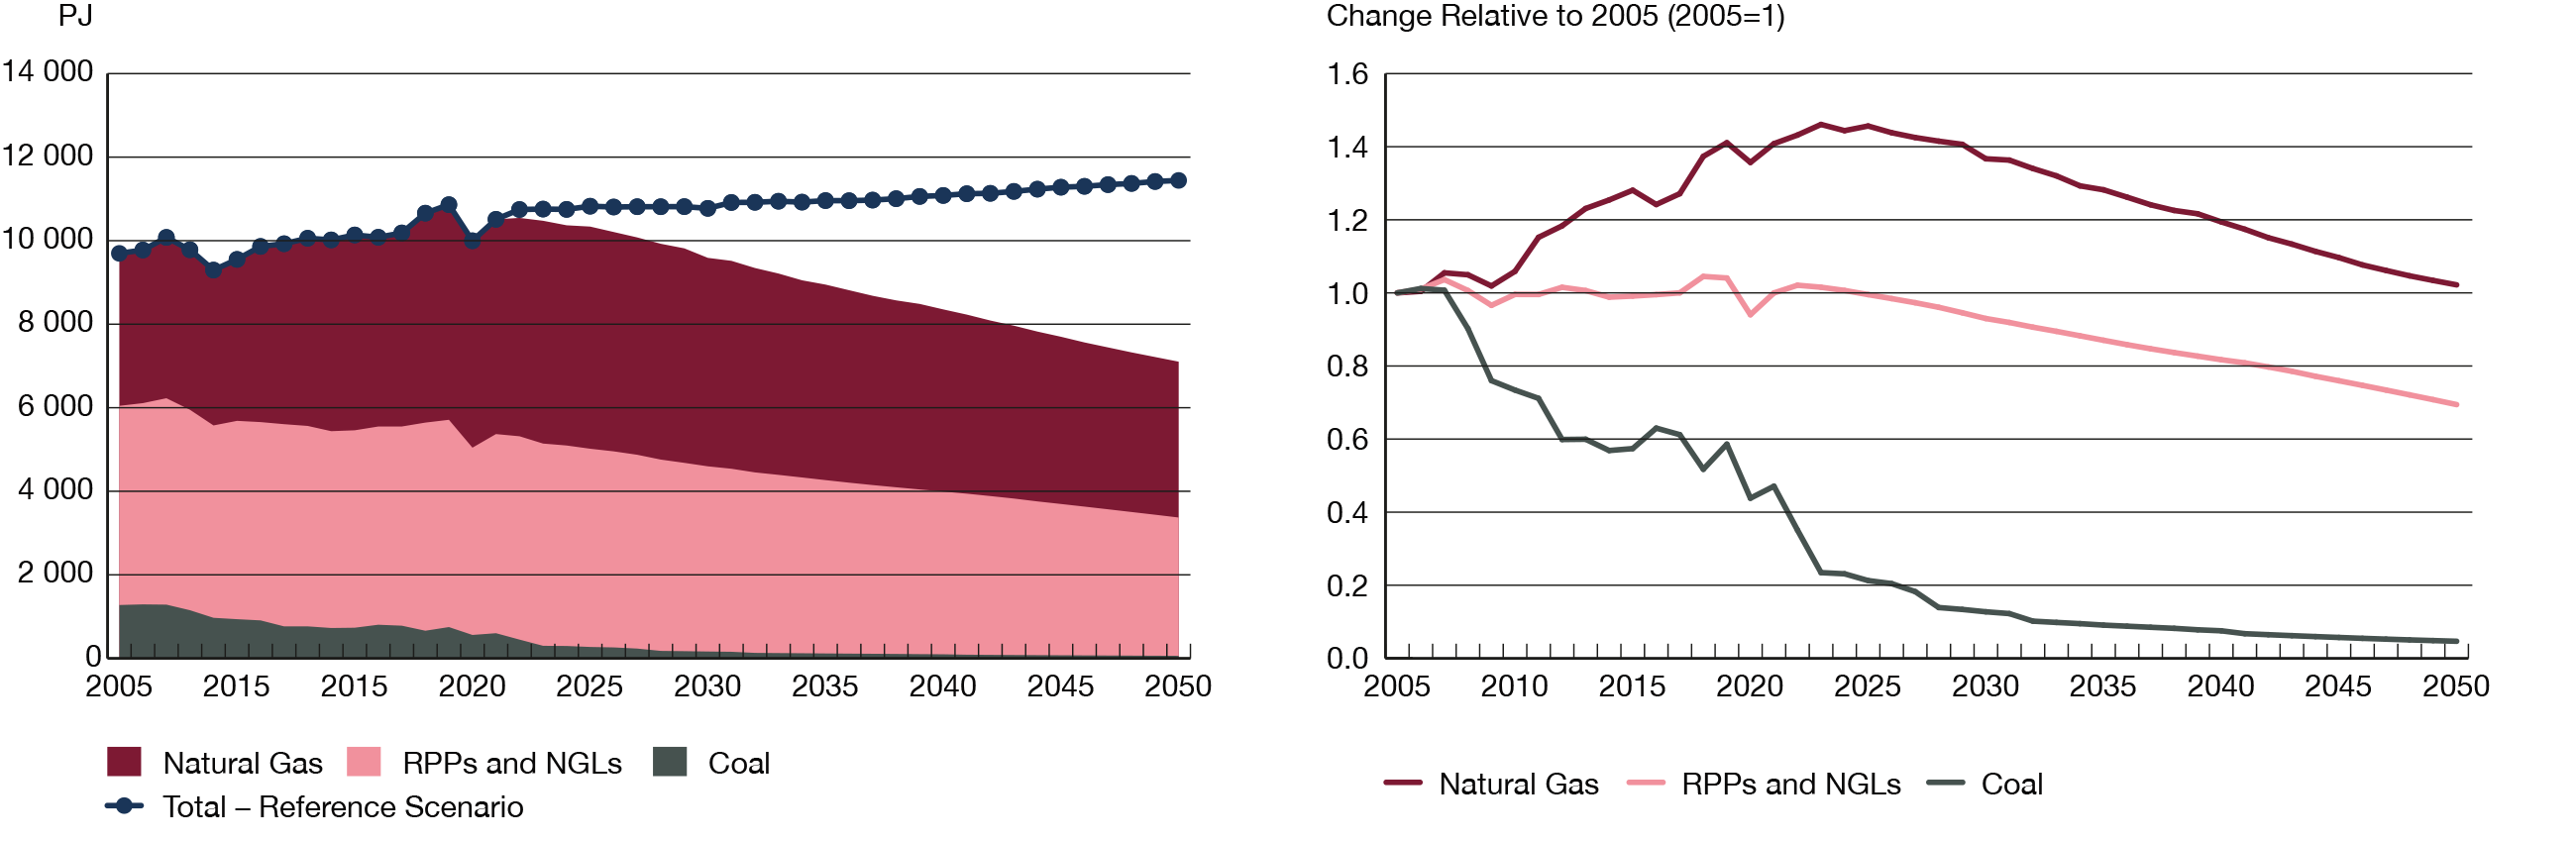 Figure 25 Total Demand for Fossil Fuels Consistently Declines in the Evolving Scenario and Gradually Rises in the Reference Scenario